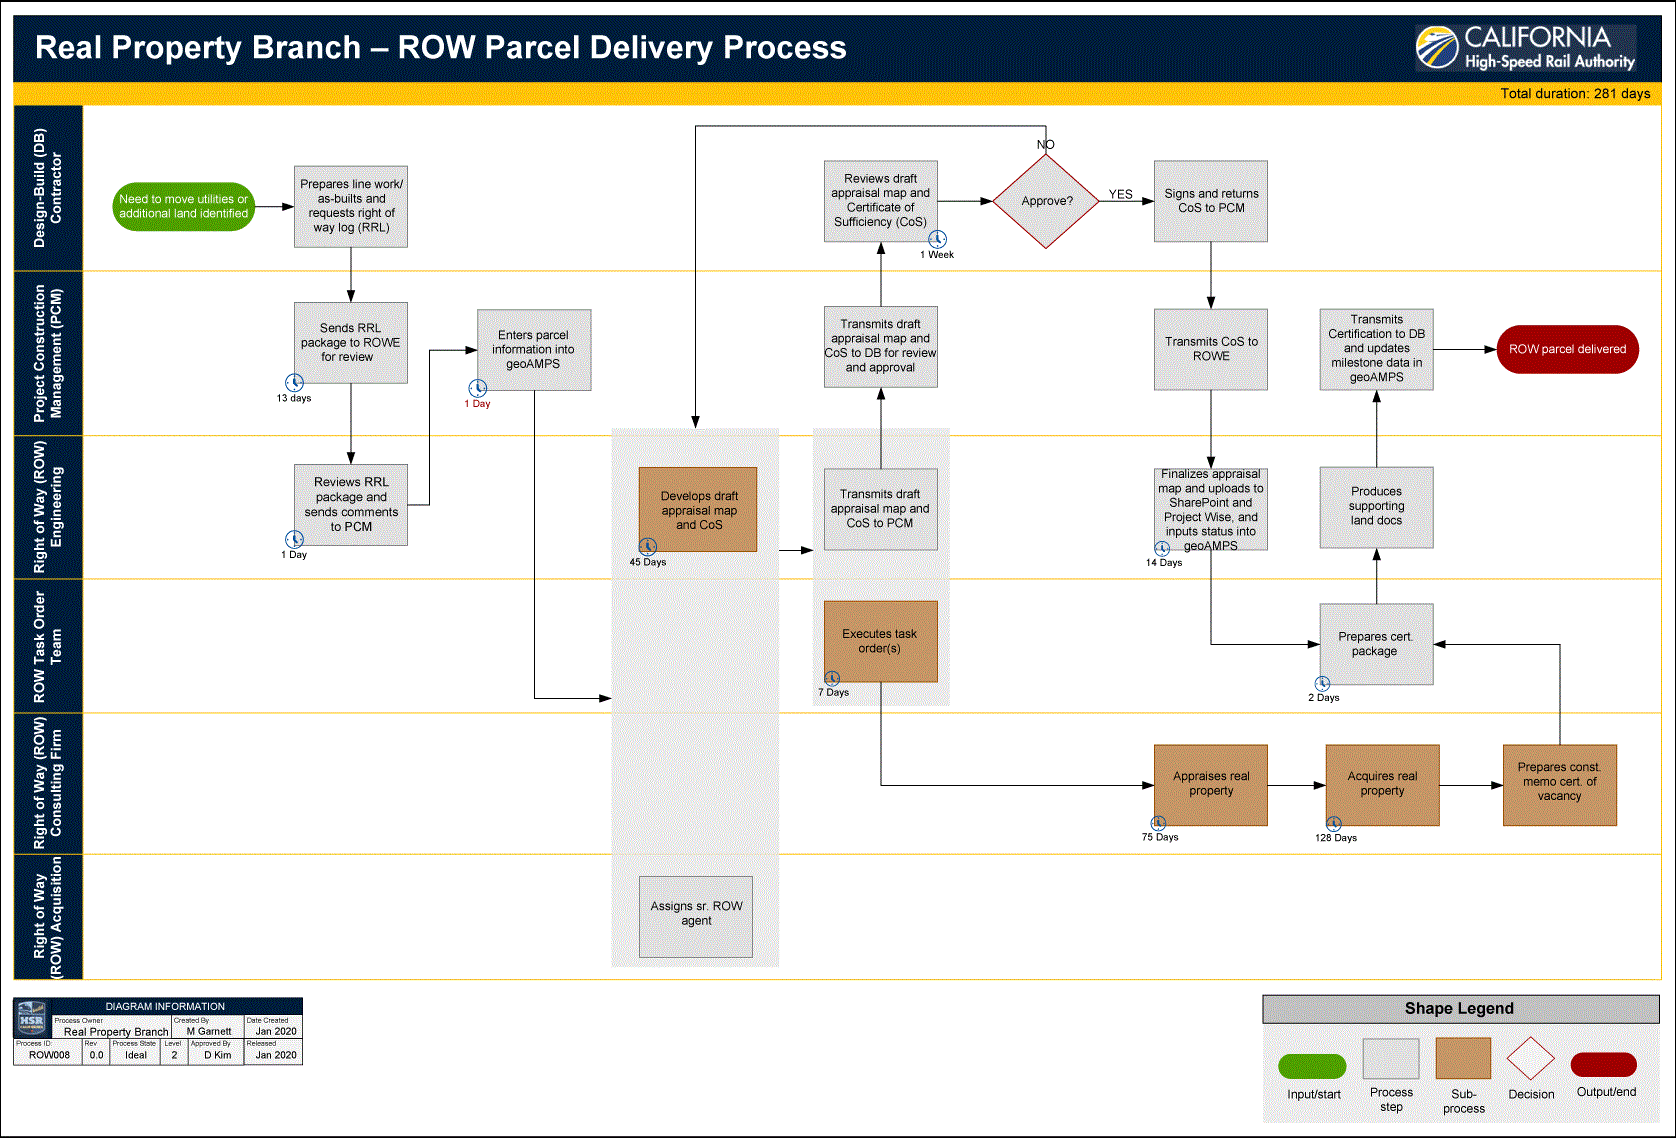 Best Practices for Process Maps at California High Speed Rail Authority